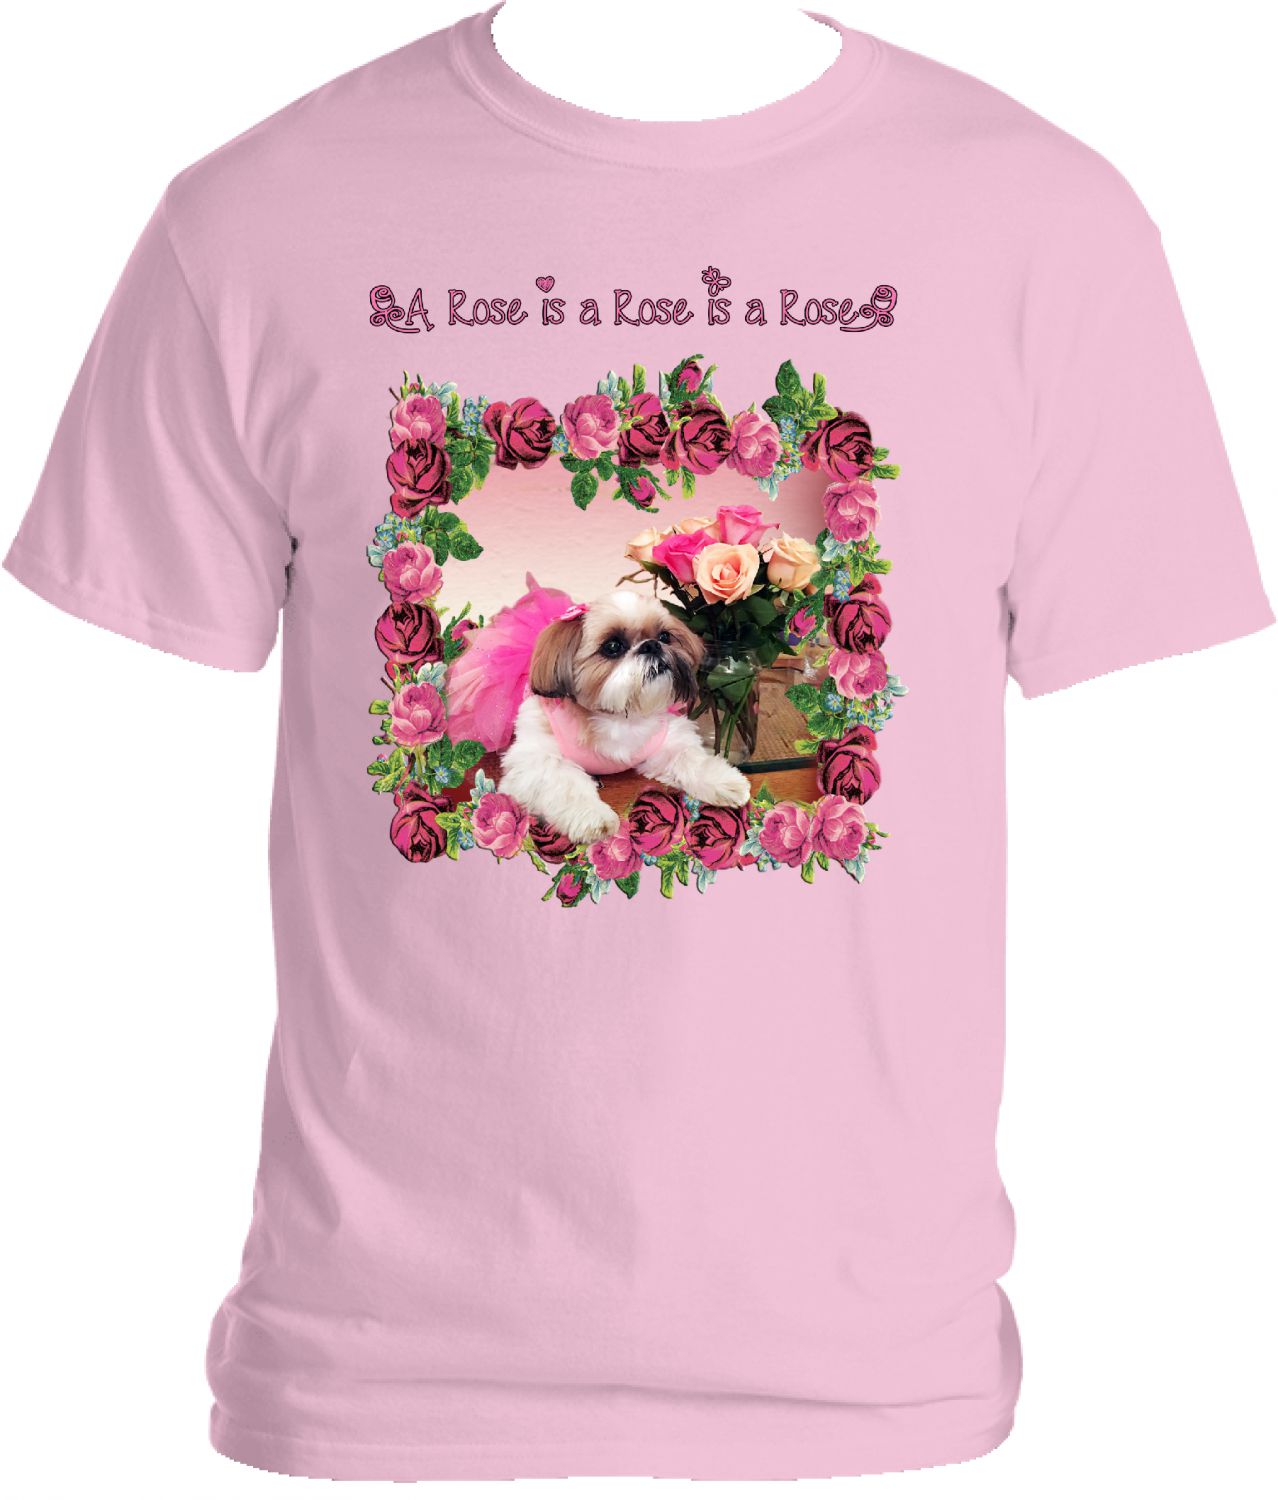 A rose is a rose is a rose Tee